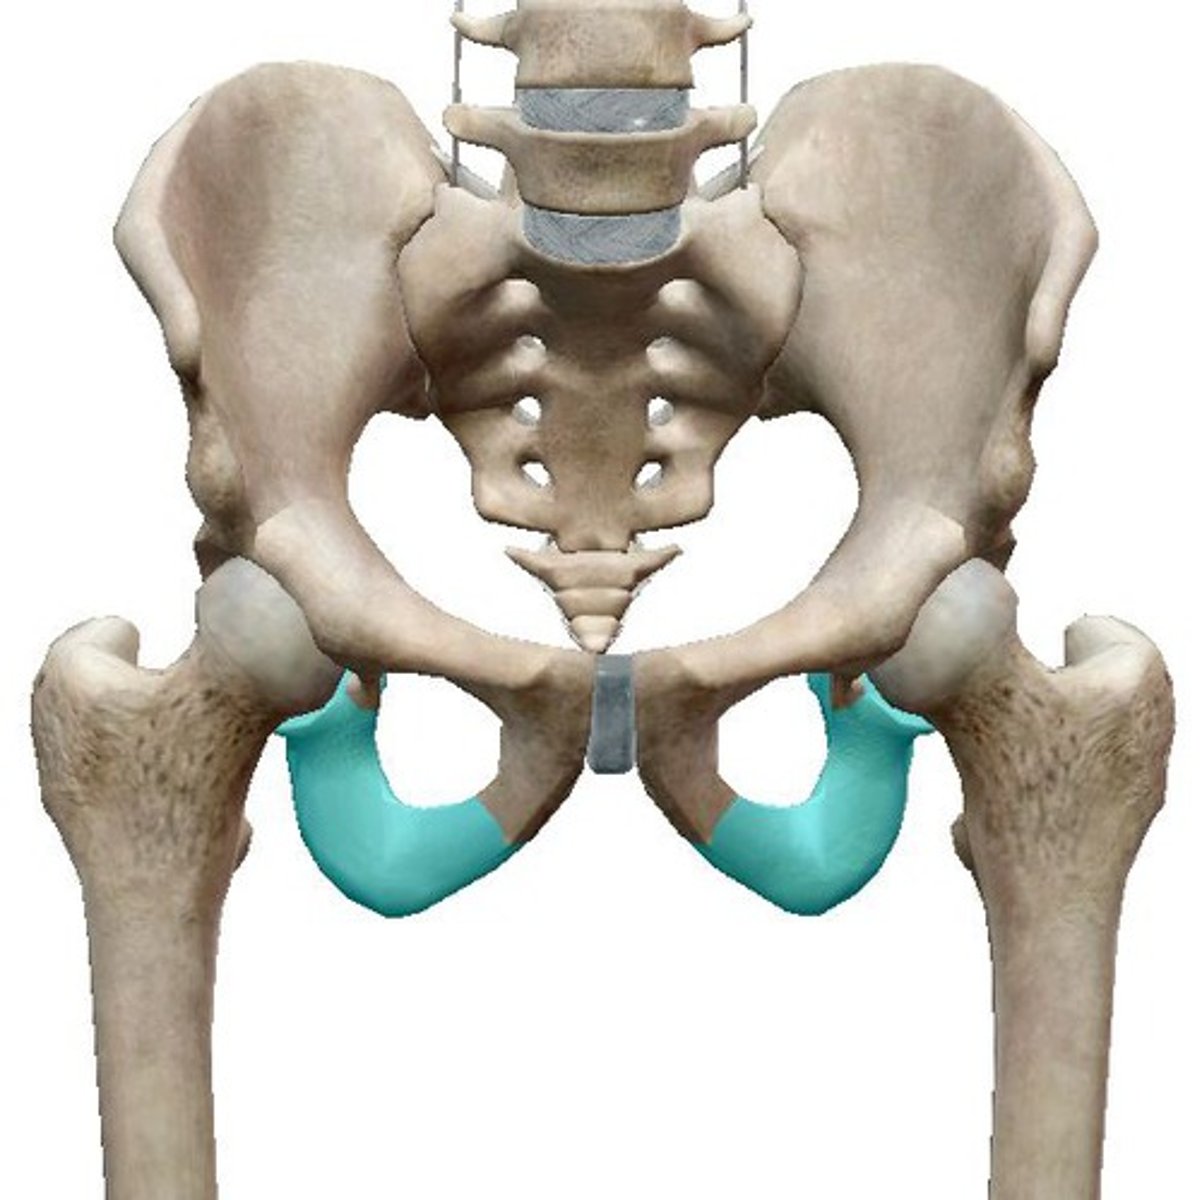 <p>- strongest, lowermost</p><p>- includes ishial tuberosity which you sit on</p>